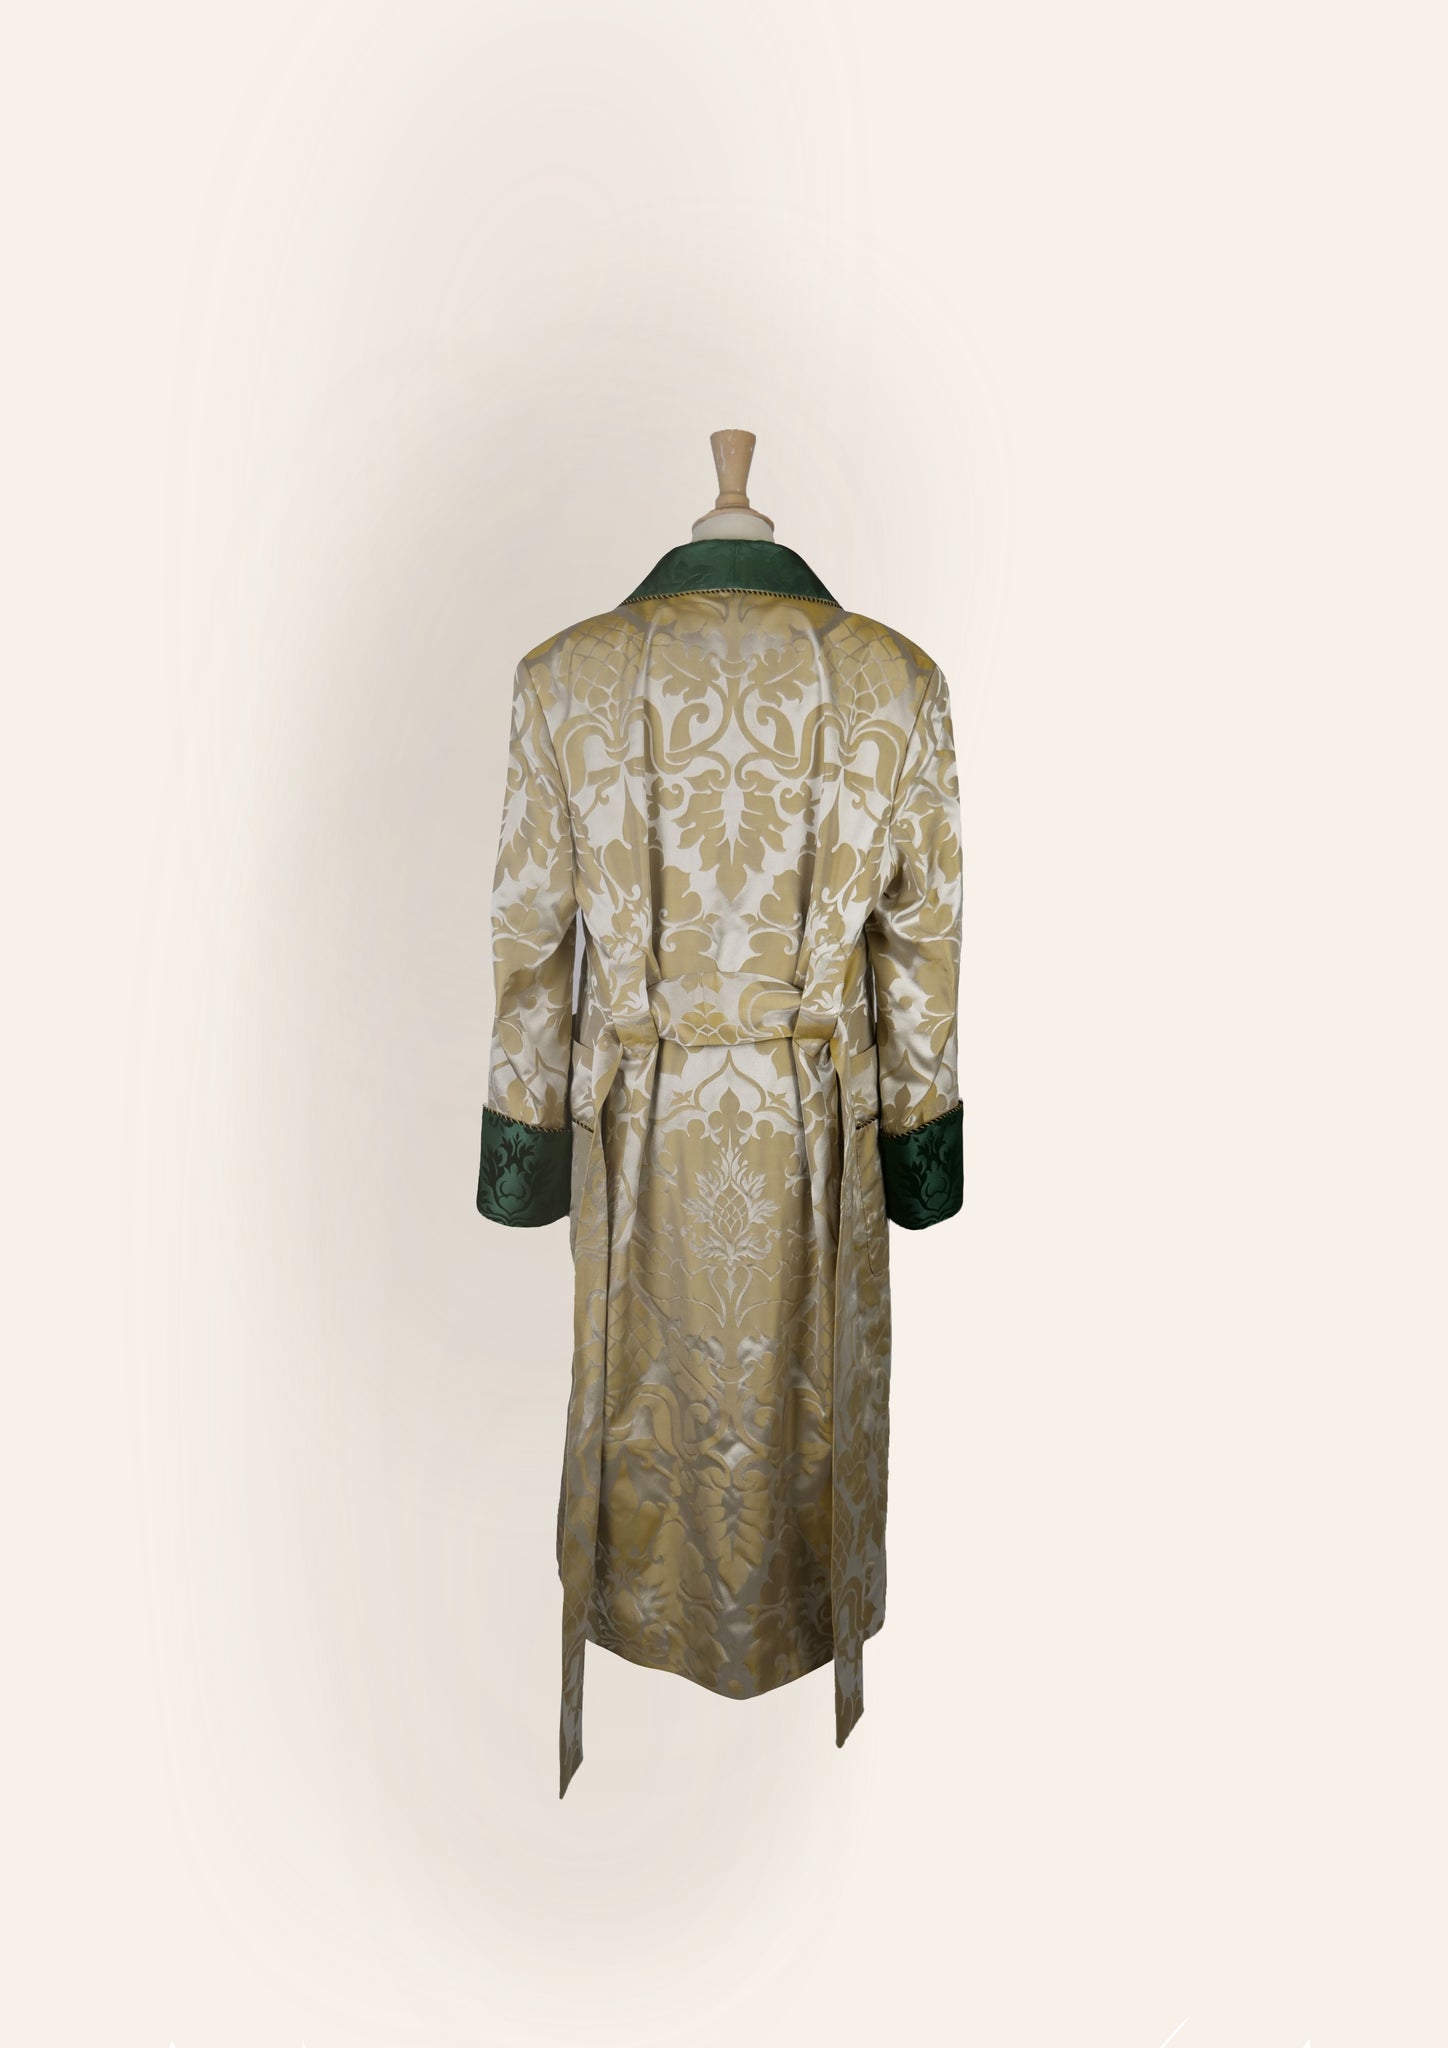 Women's Oyster Silk Dressing Gown Sample (size small)